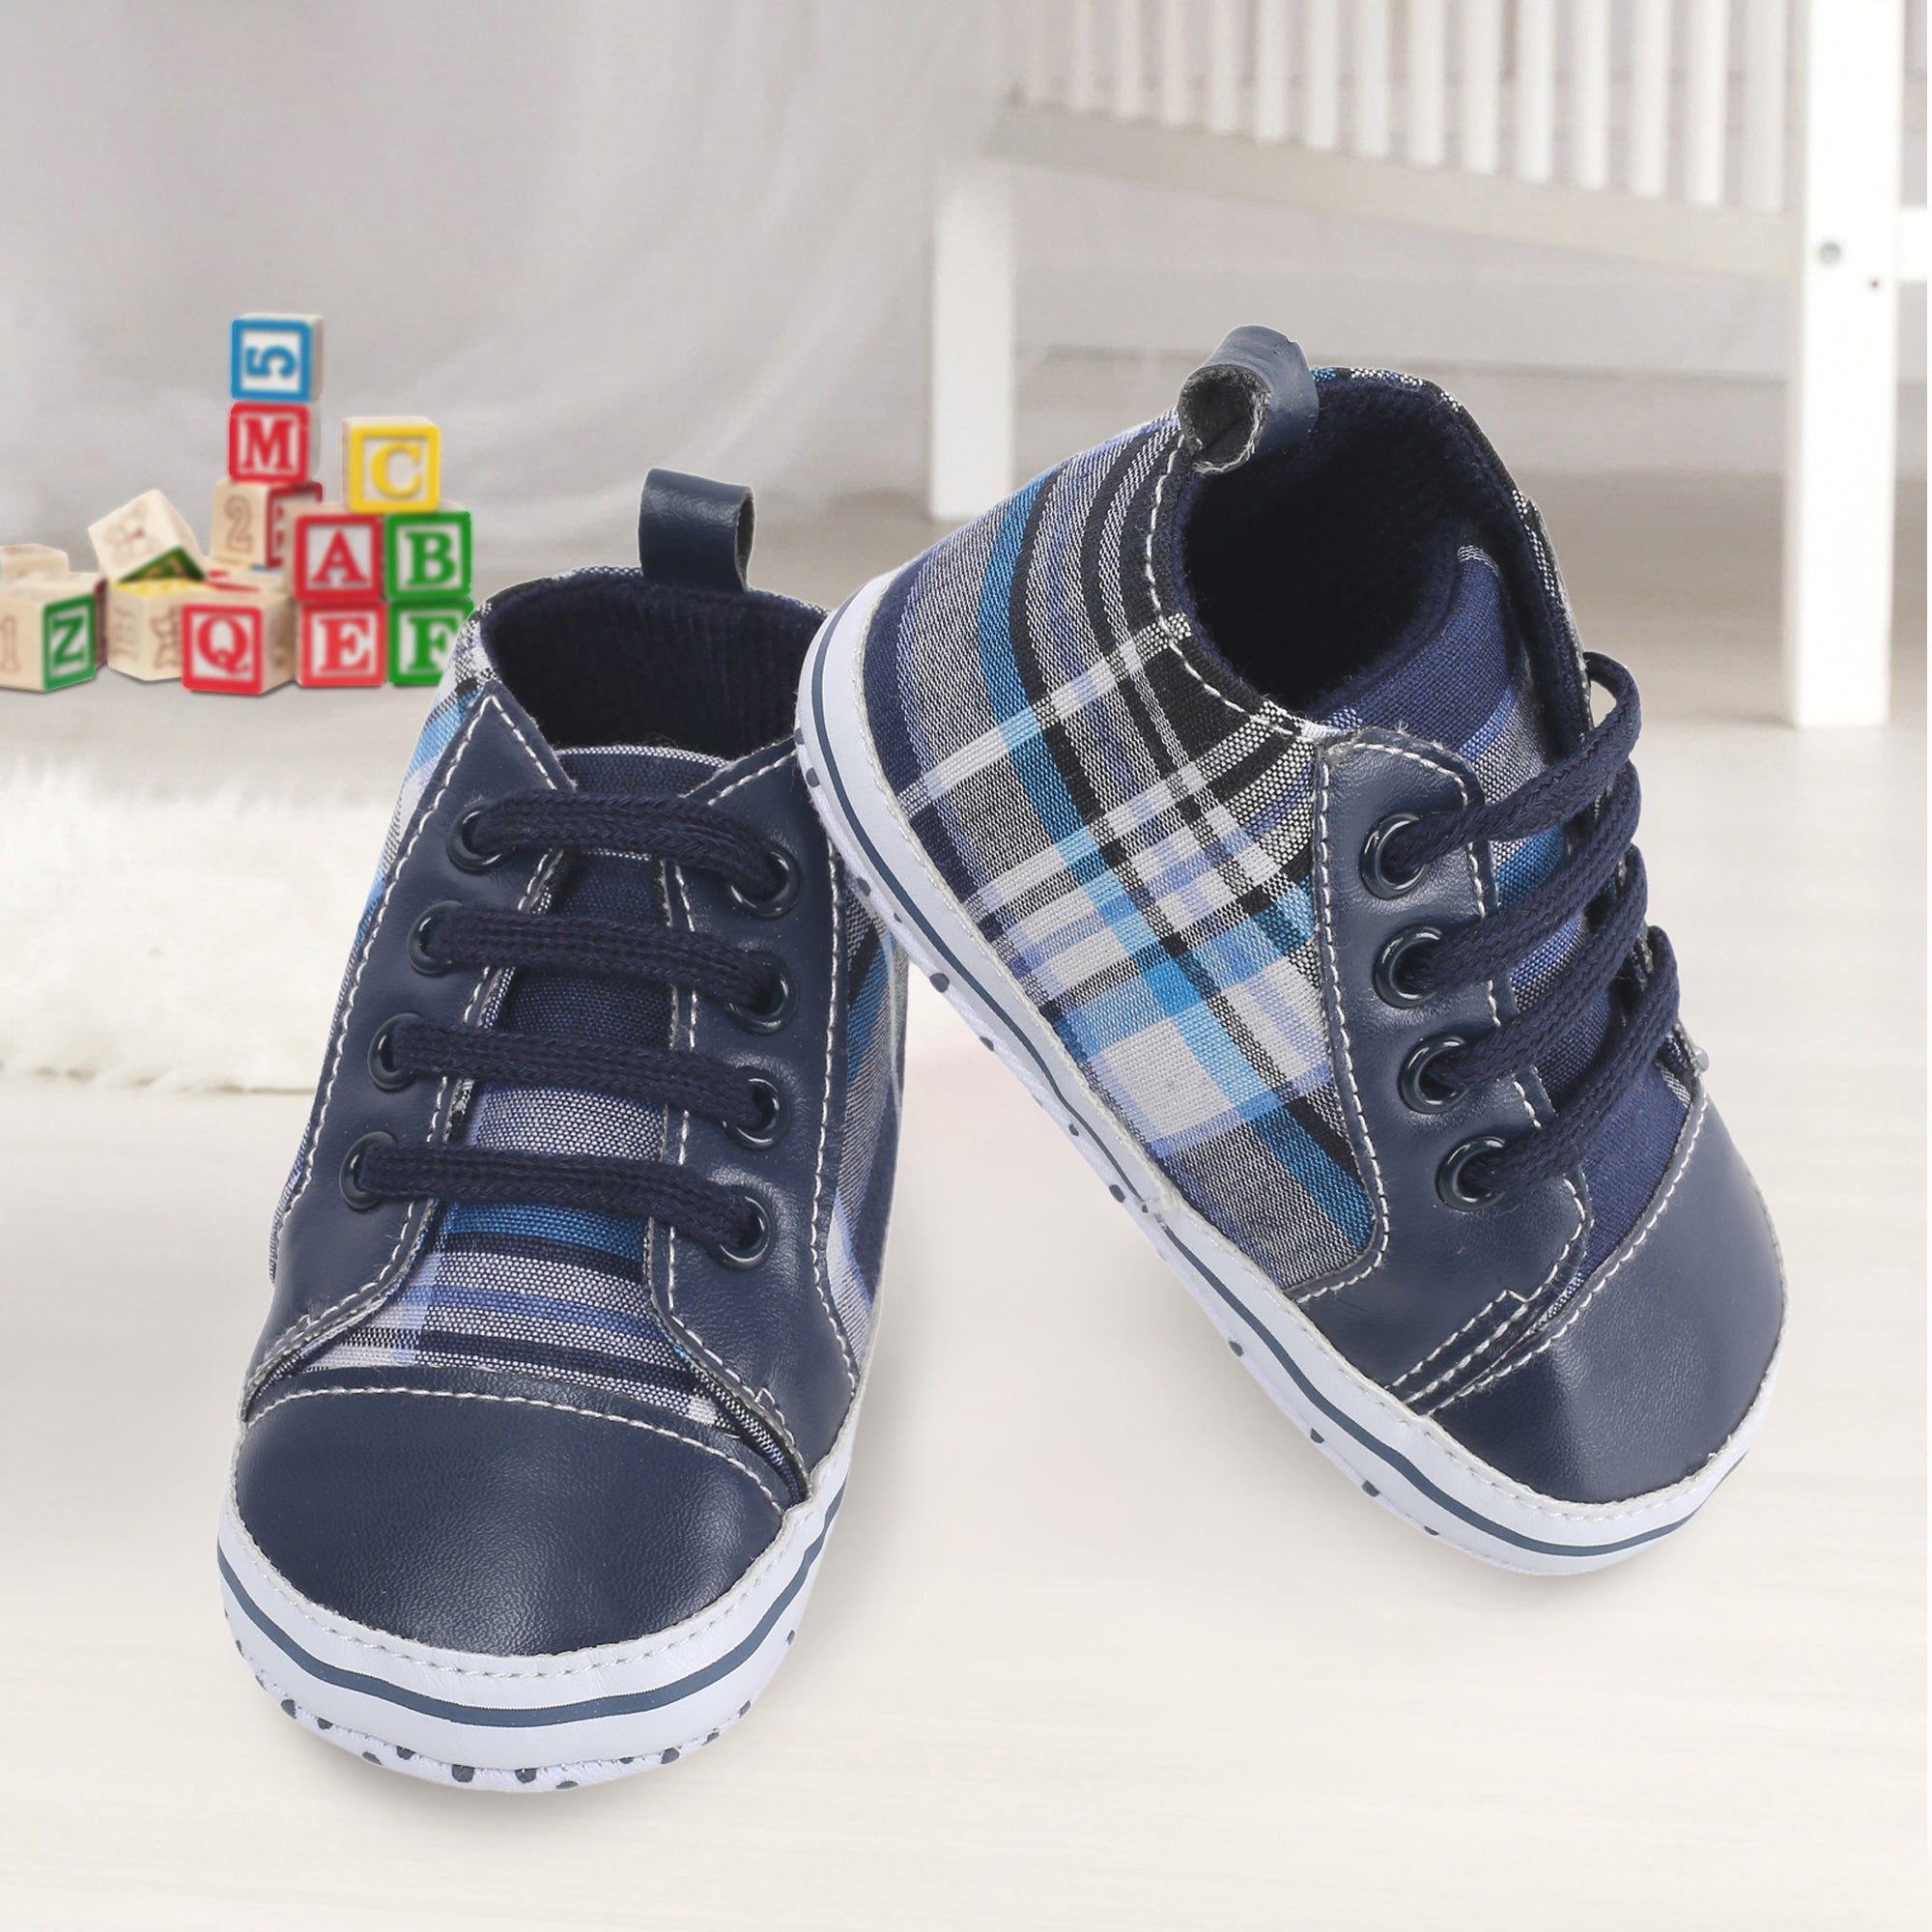 Baby Moo Checked Blue Sneakers - Baby Moo